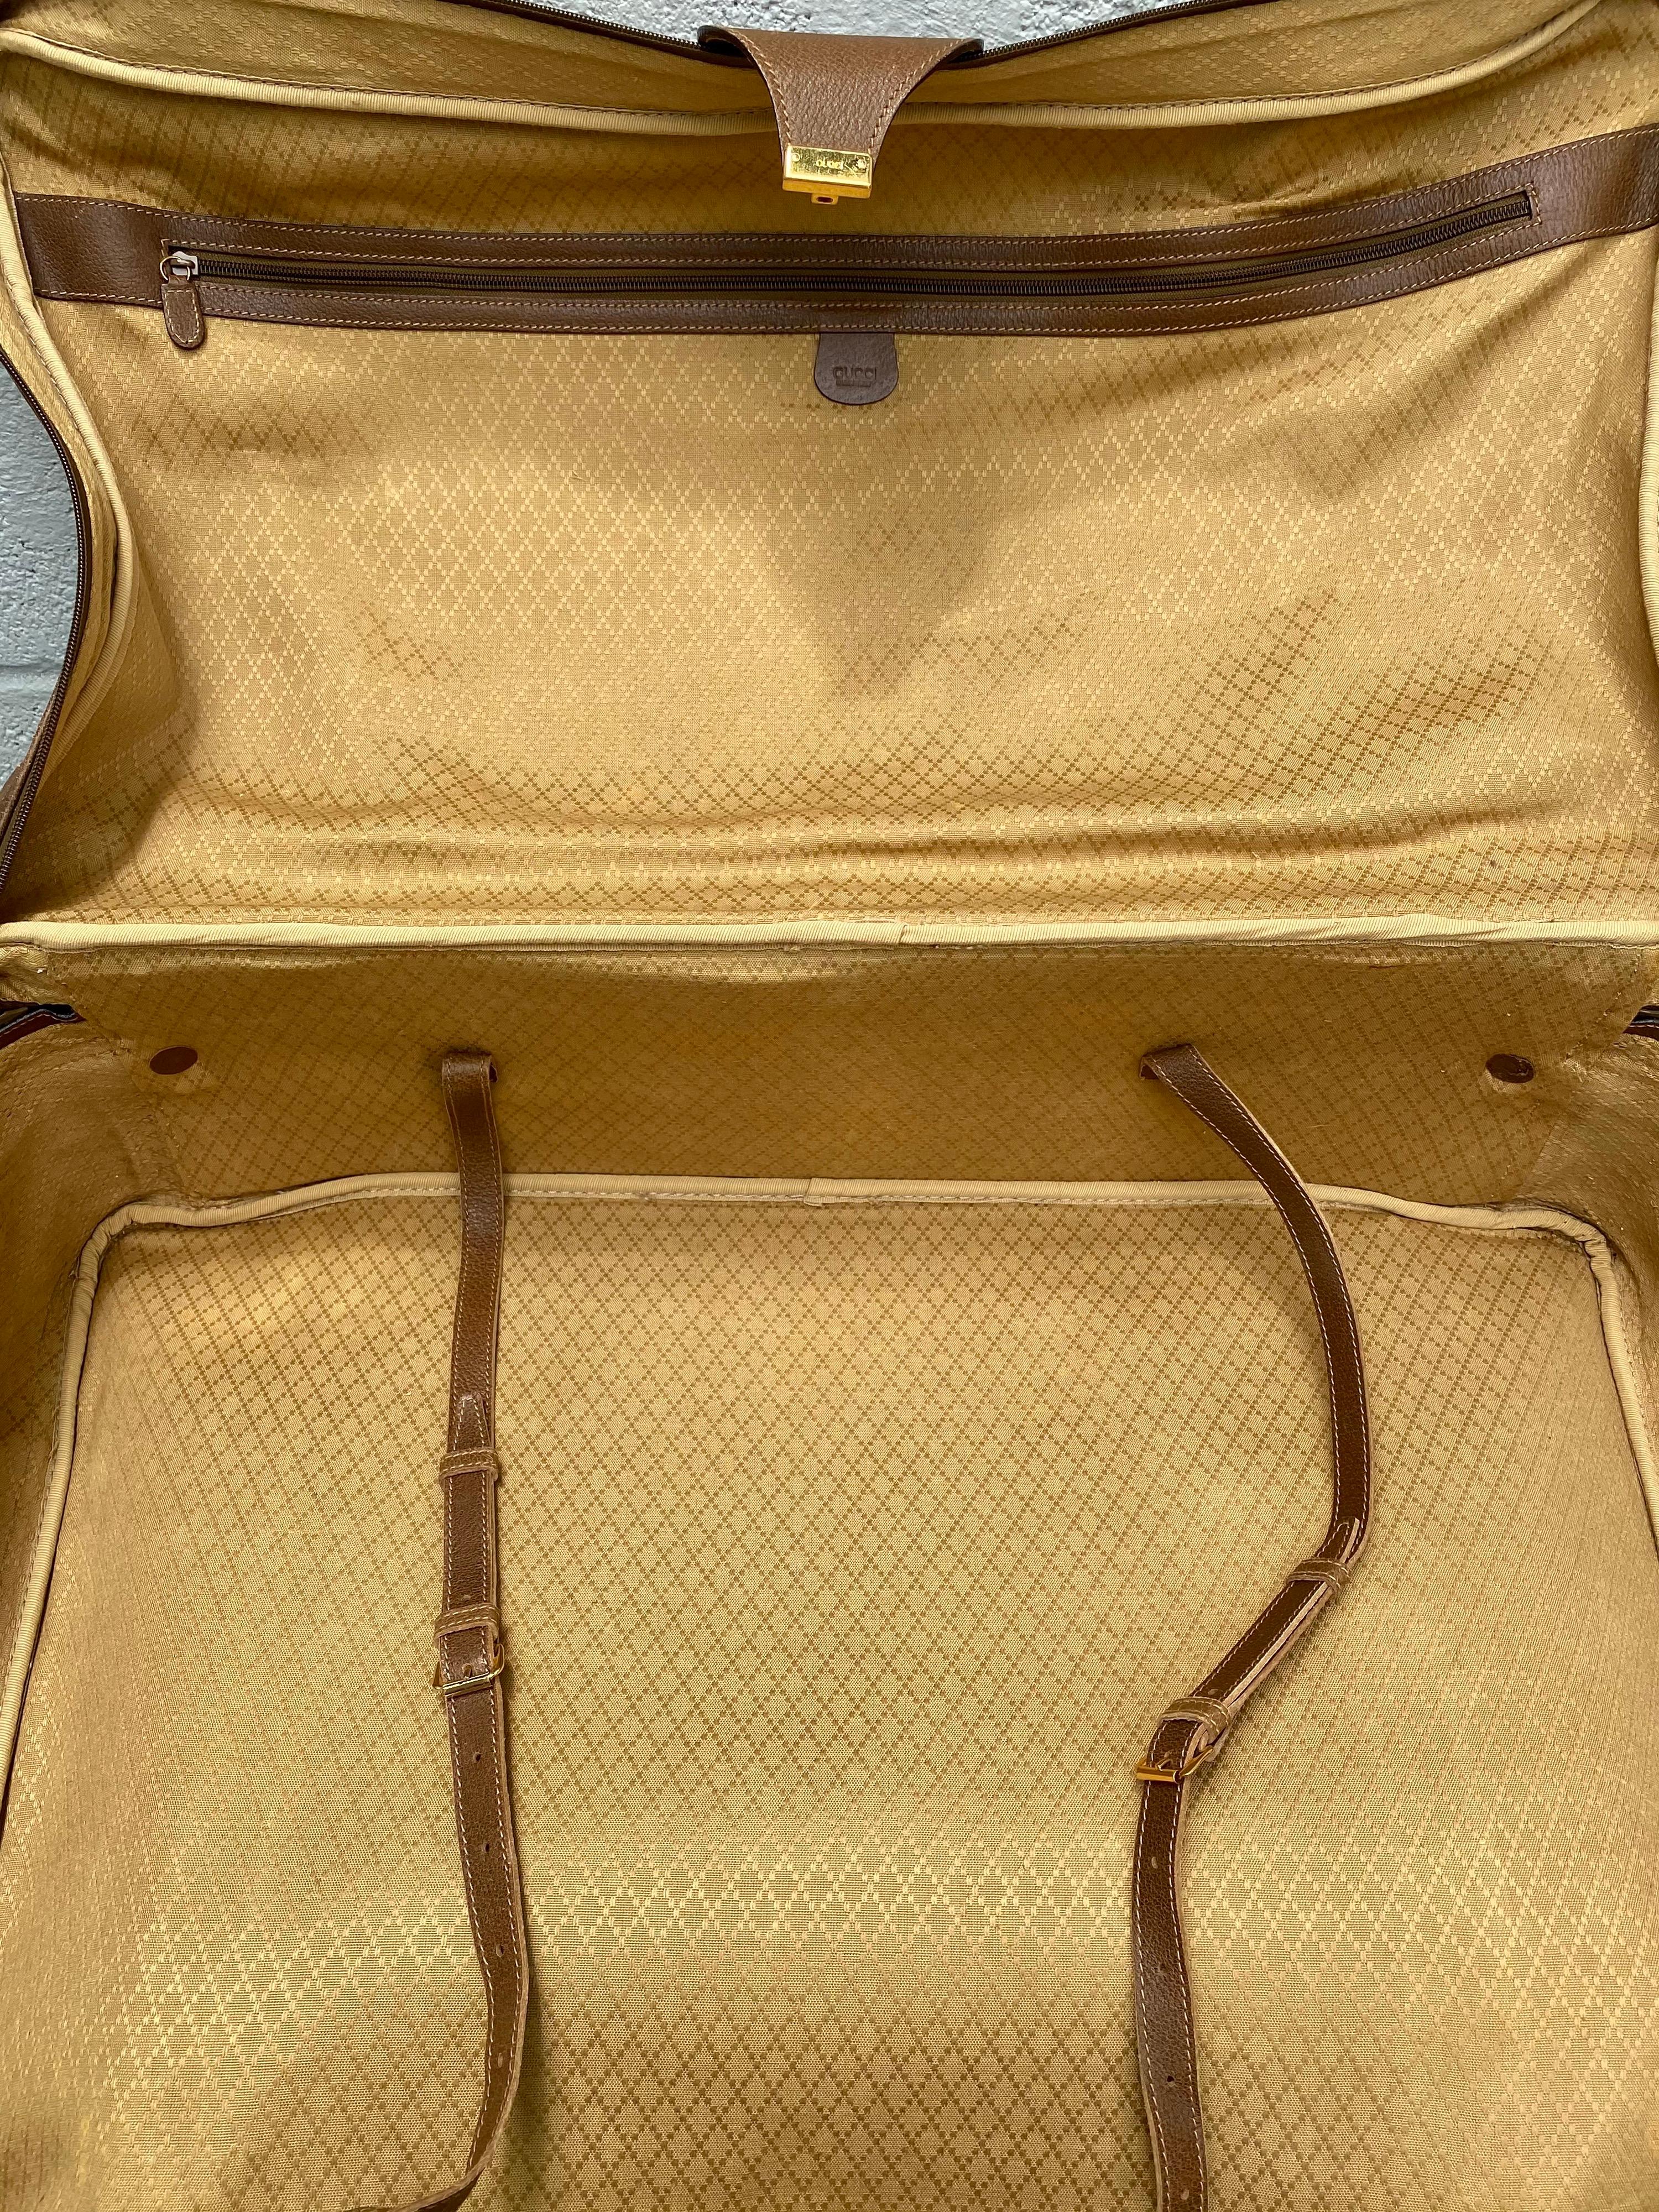 Gucci Vintage Rare GG Monogram Suitcase Travel Luggage For Sale 4